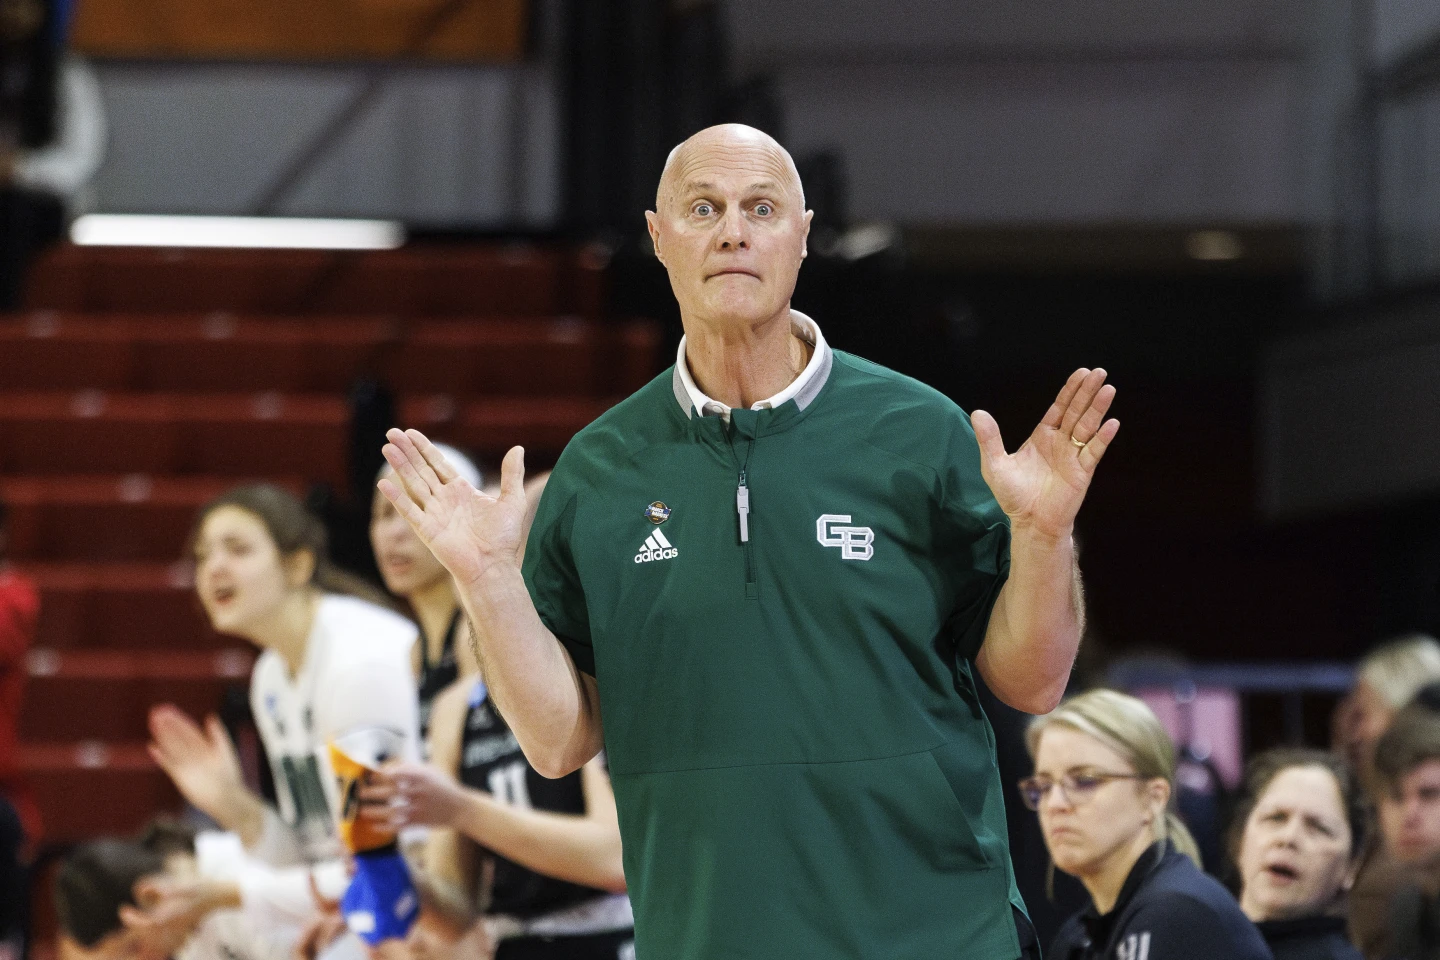 UW-Green Bay’s Kevin Borseth retires with 821 wins — ranks 16th in Division I in career victories